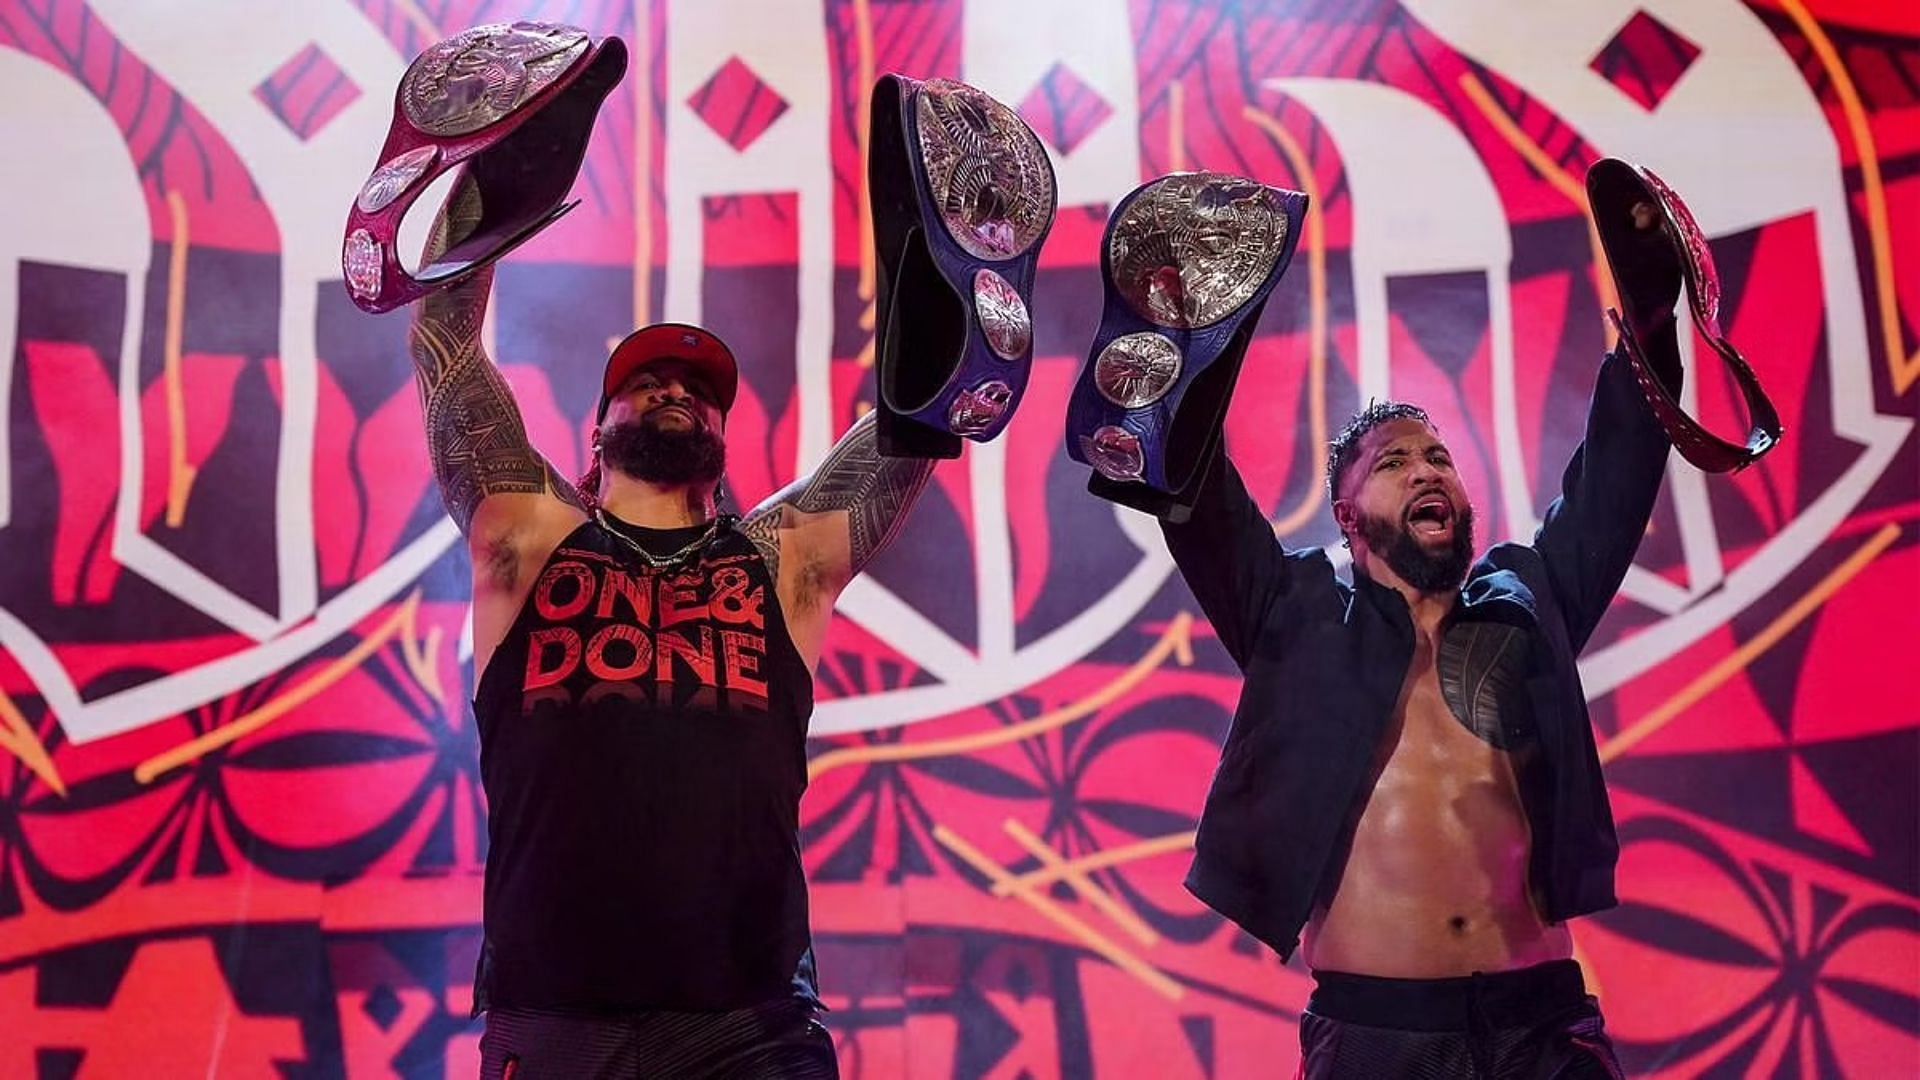 The Usos are the current Undisputed WWE Tag Team Champions